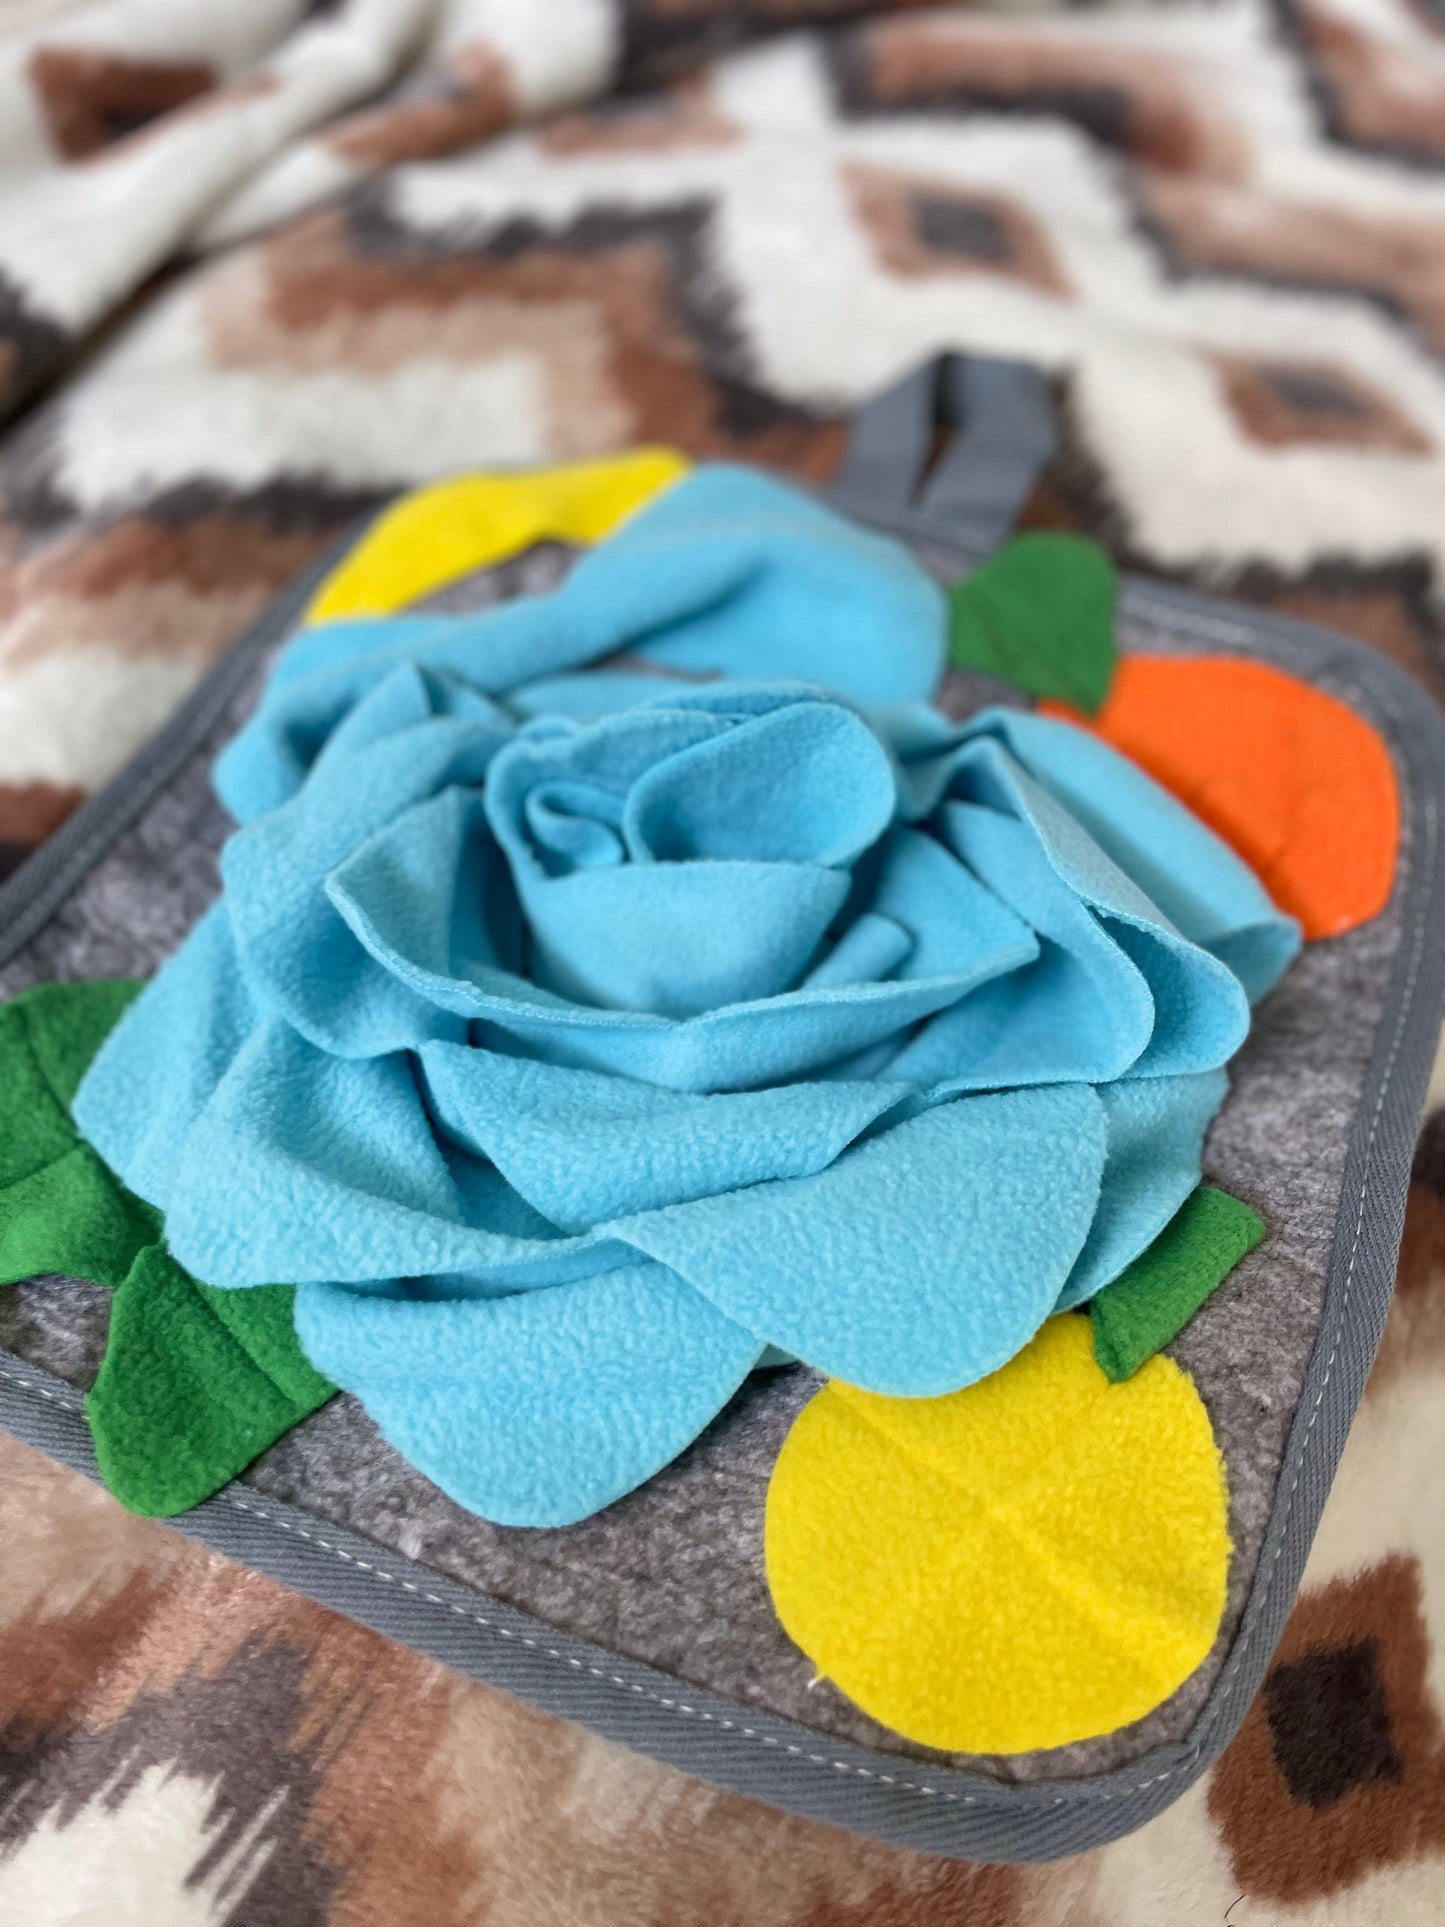 Rose Garden Snuffle Mat~ Foraging toy, boredom busting enrichment for bunnies, hamsters, guinea pigs and other small animals